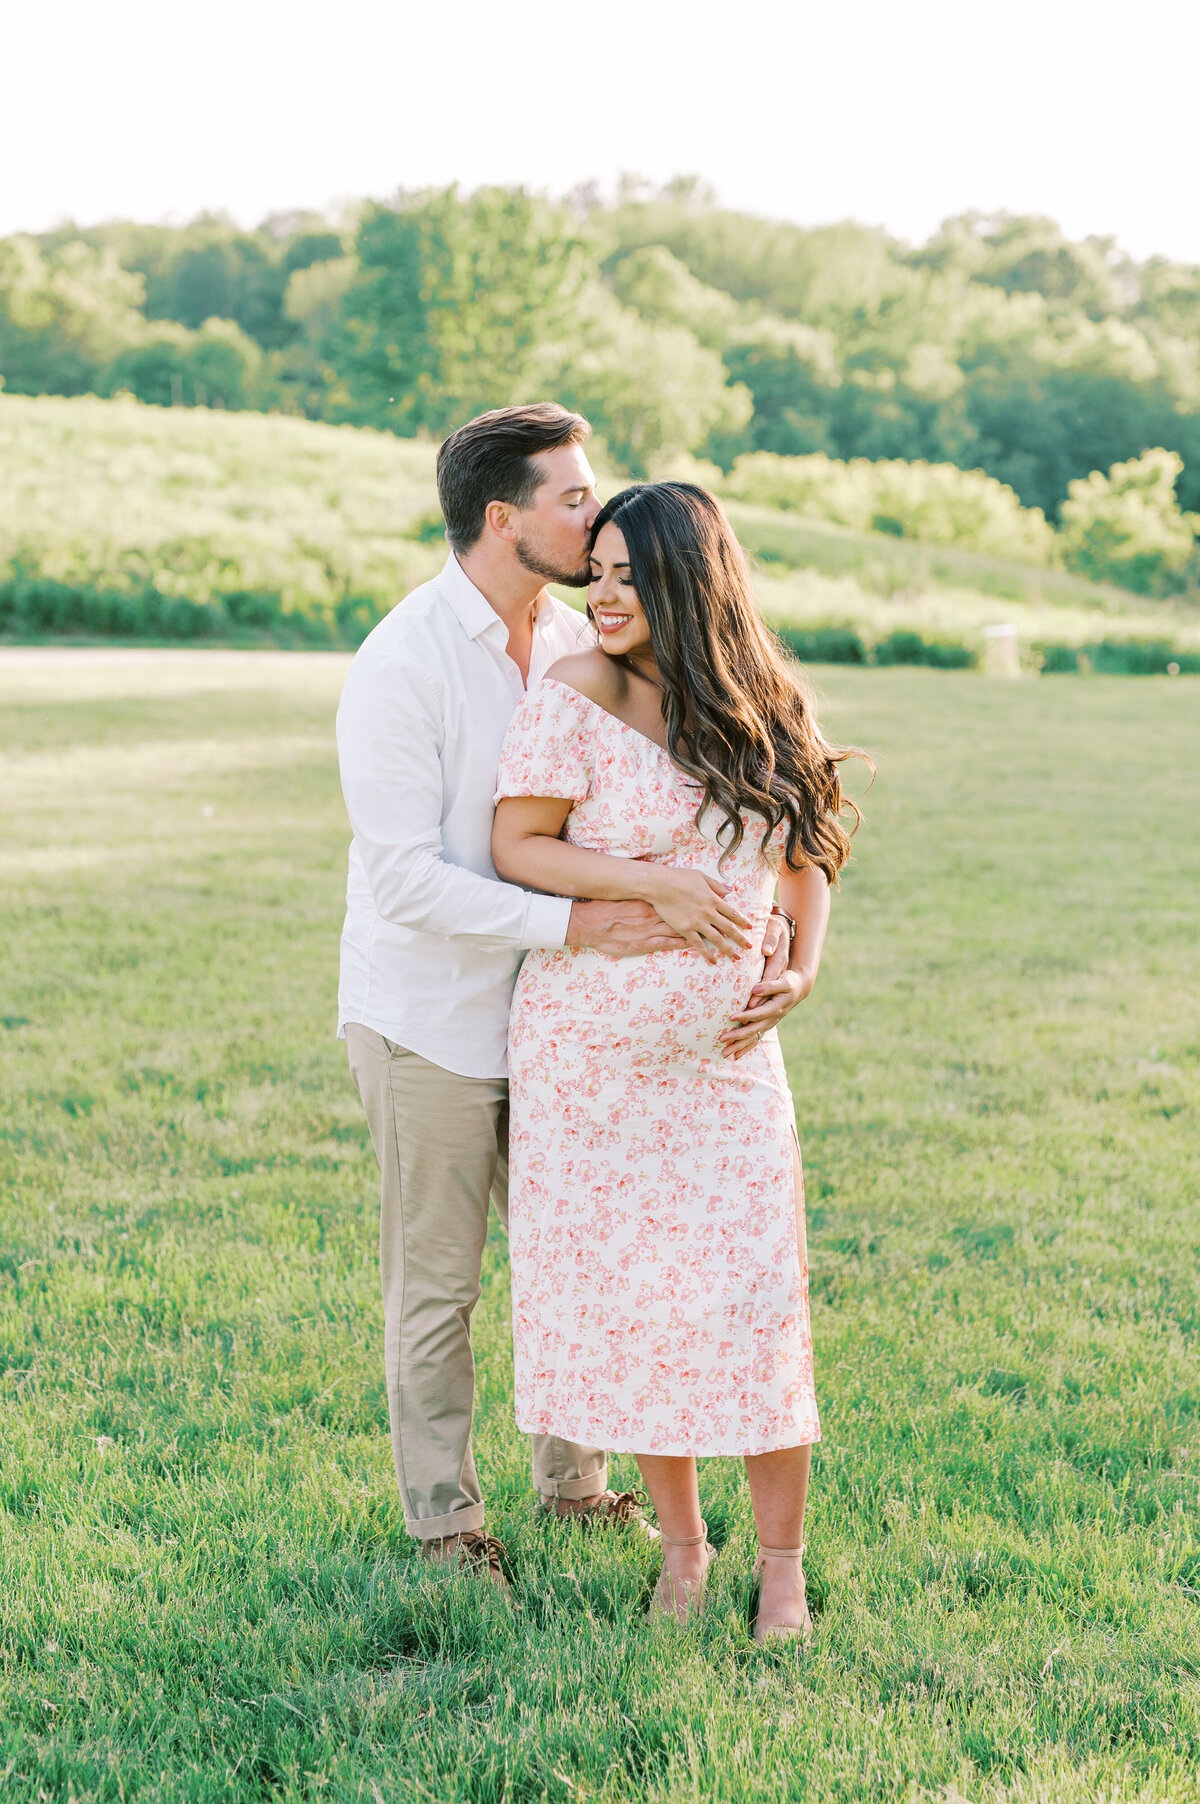 Mom and dad standing together in field with hands on mom's stomach during maternity session